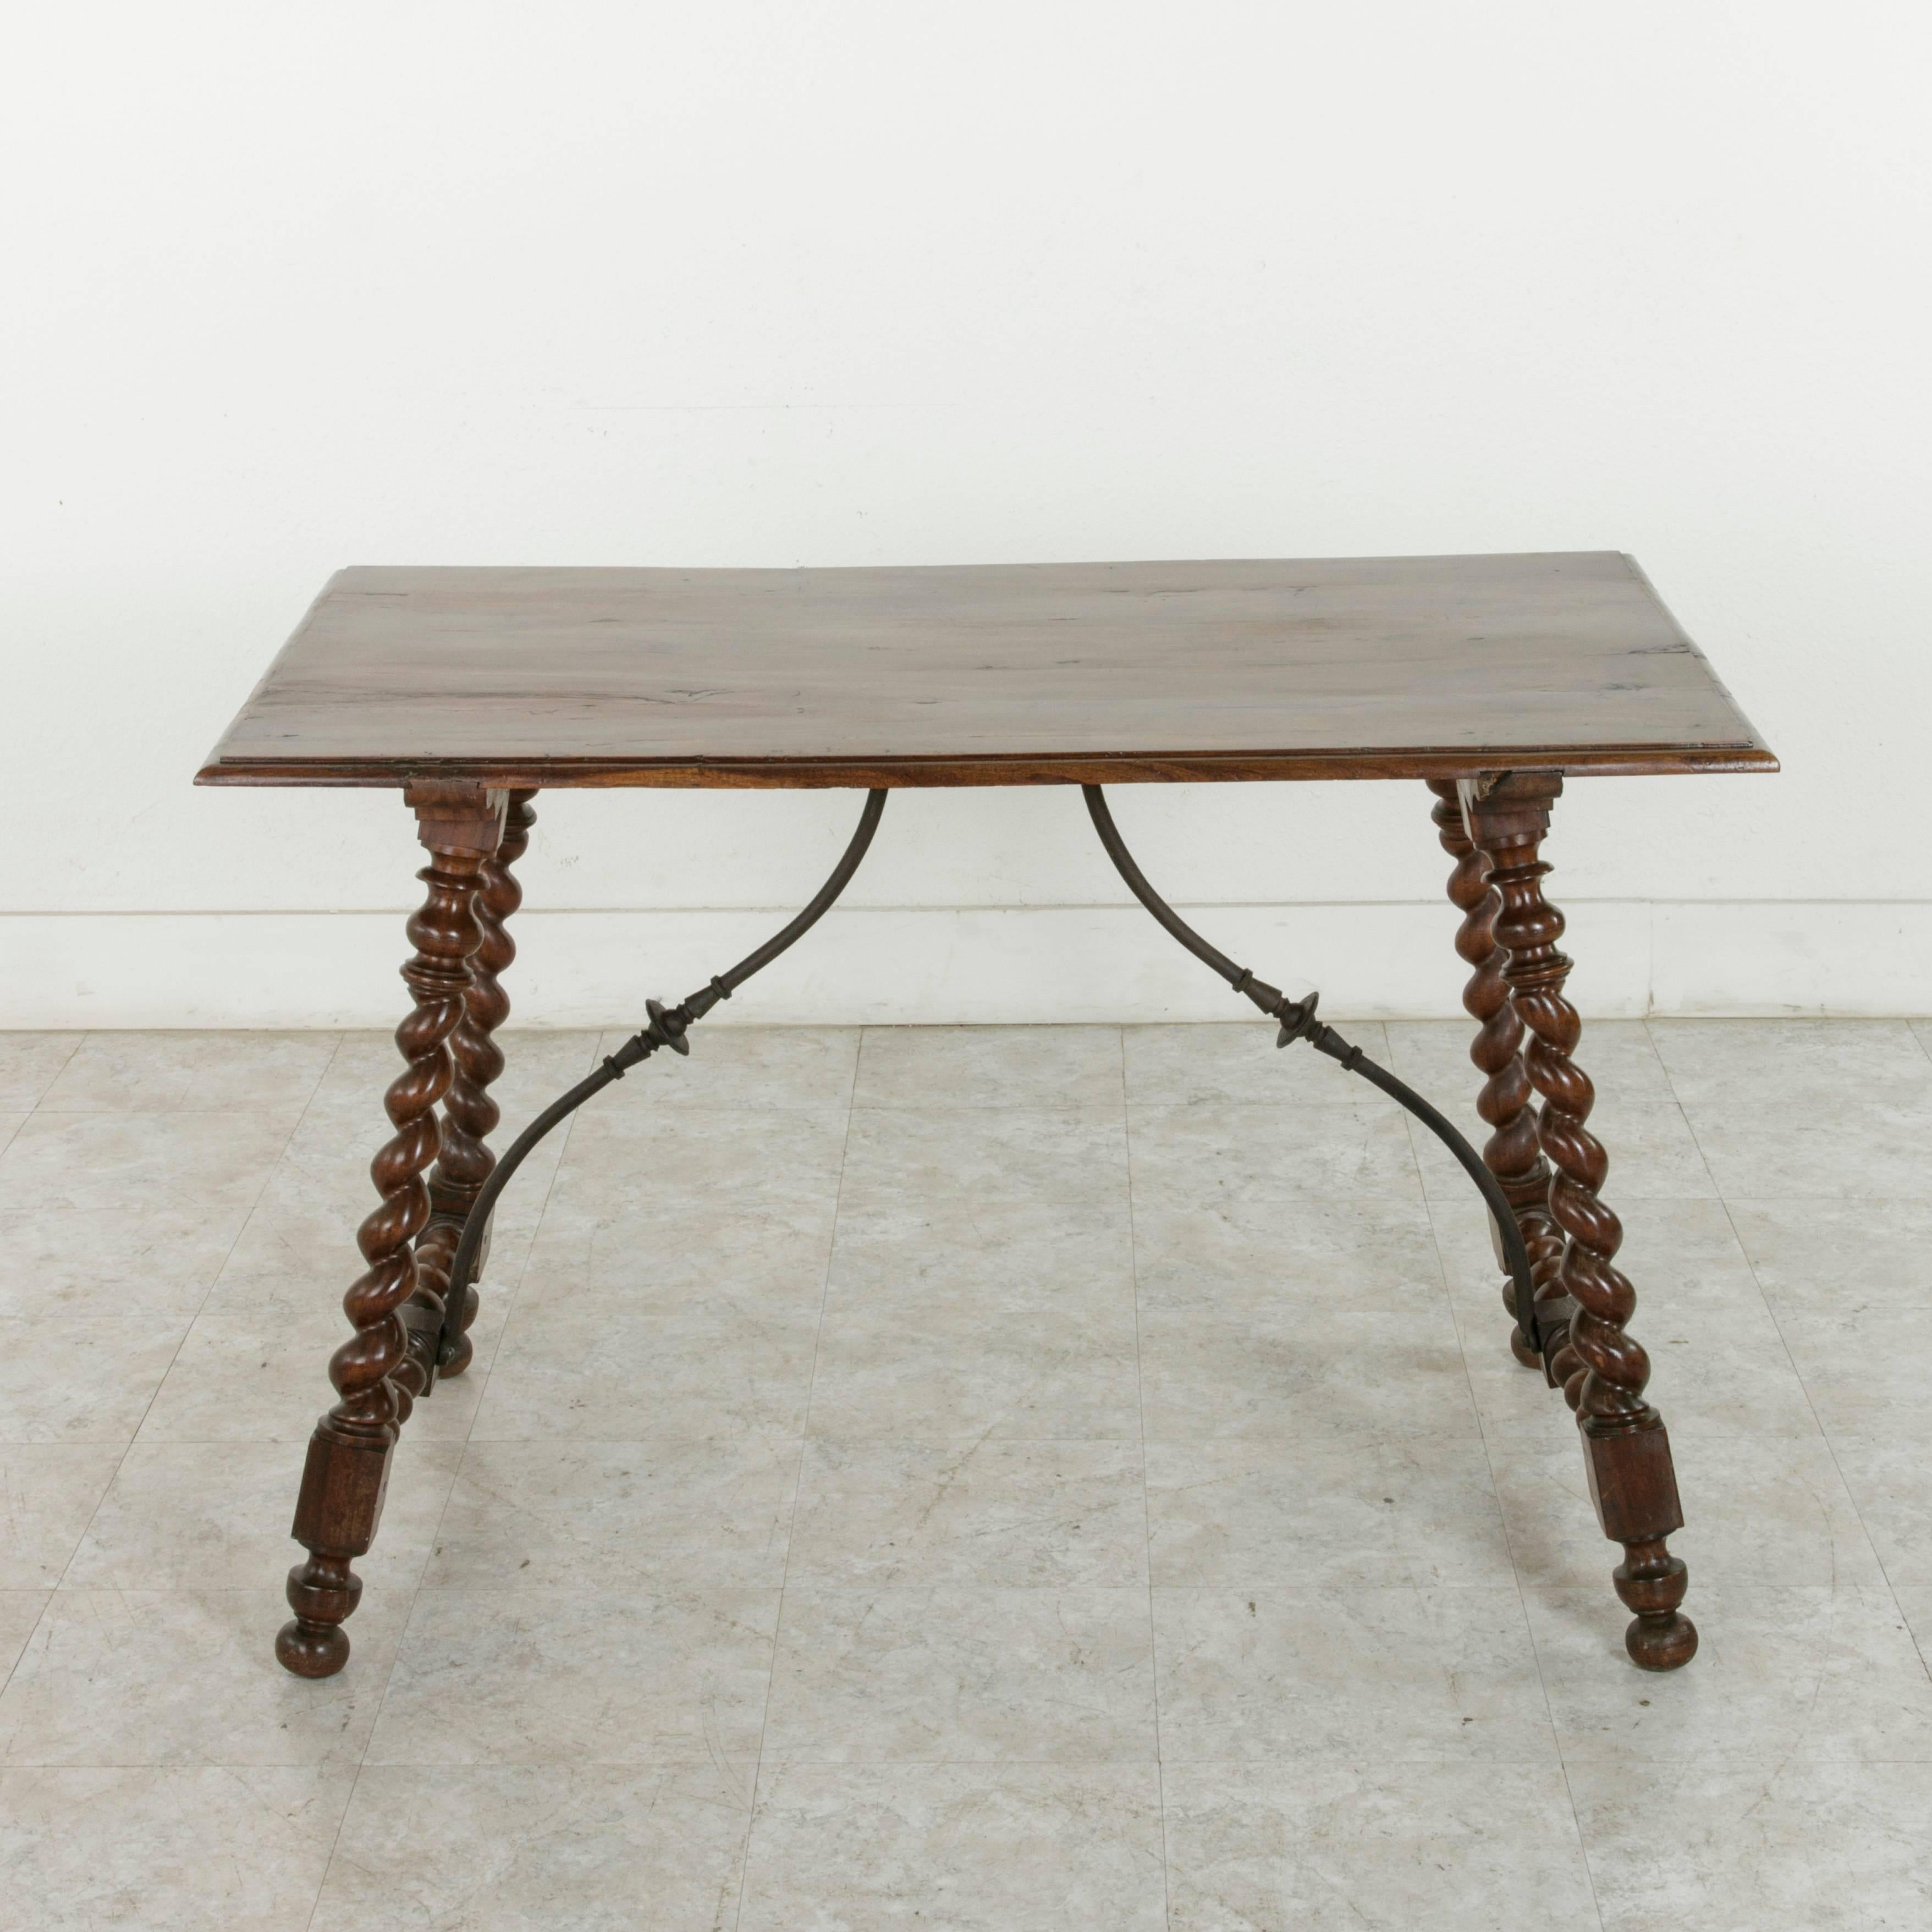 This 19th century walnut table from France features a beveled top supported by Classic barley twist legs. Barley twist stretchers between the hand pegged lower die joints of the legs support hand-forged iron braces that attach to the top providing